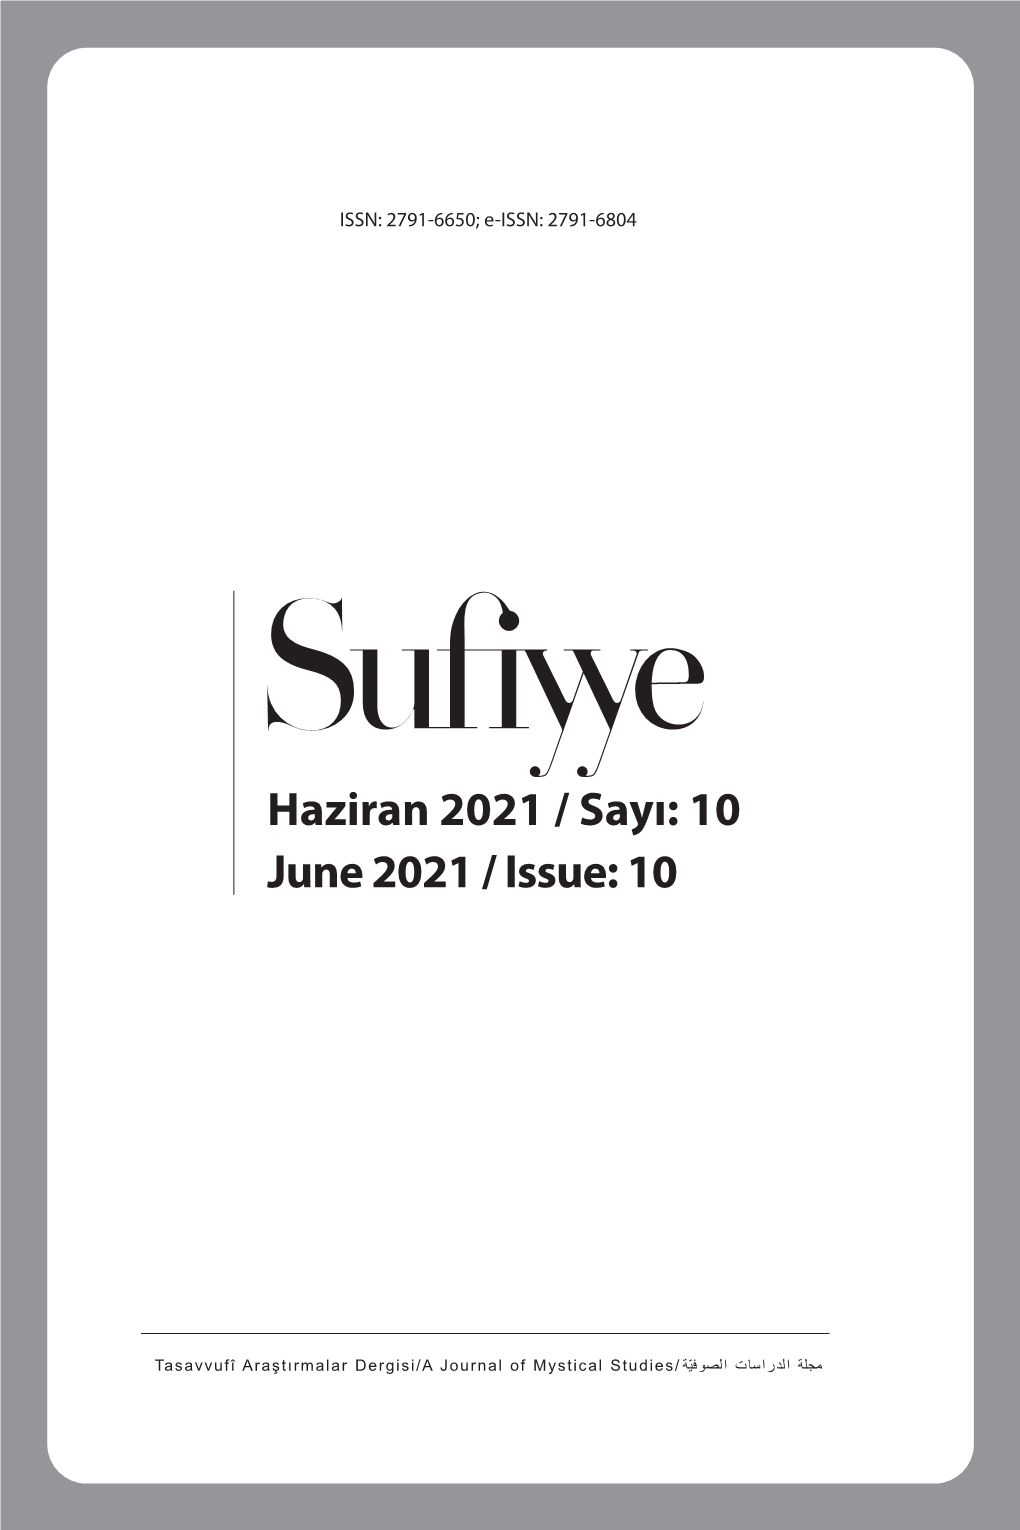 10 June 2021 / Issue: 10